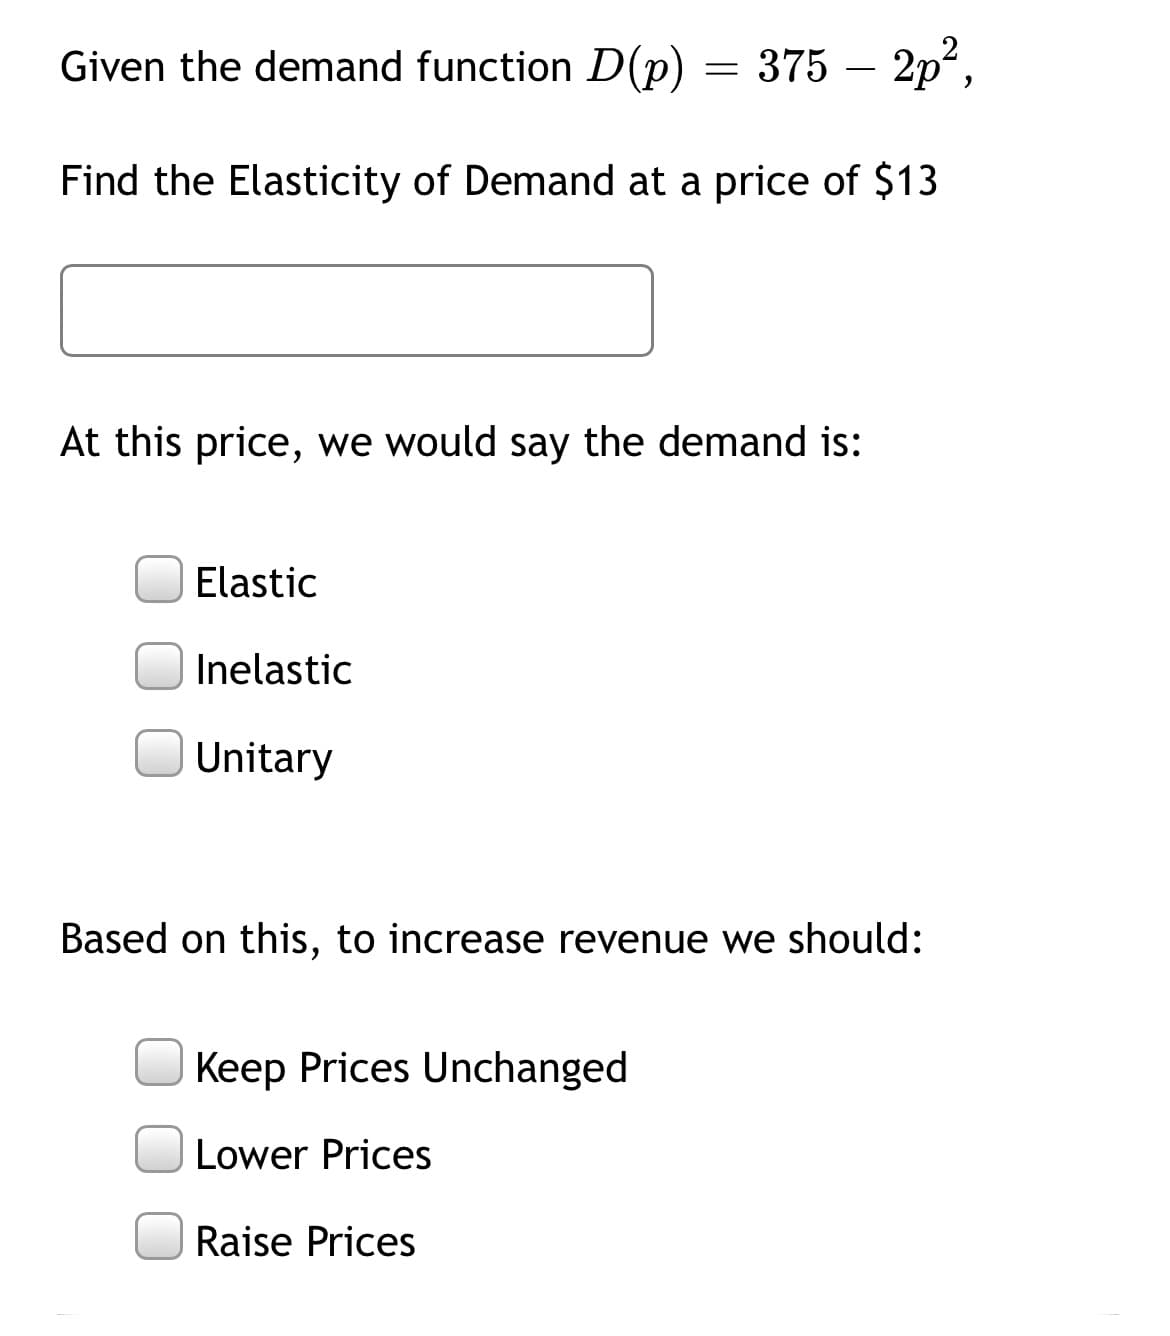 Given the demand function D(p)
375 – 2p,
-
Find the Elasticity of Demand at a price of $13
At this price, we would say the demand is:
Elastic
Inelastic
Unitary
Based on this, to increase revenue we should:
Keep Prices Unchanged
Lower Prices
Raise Prices
